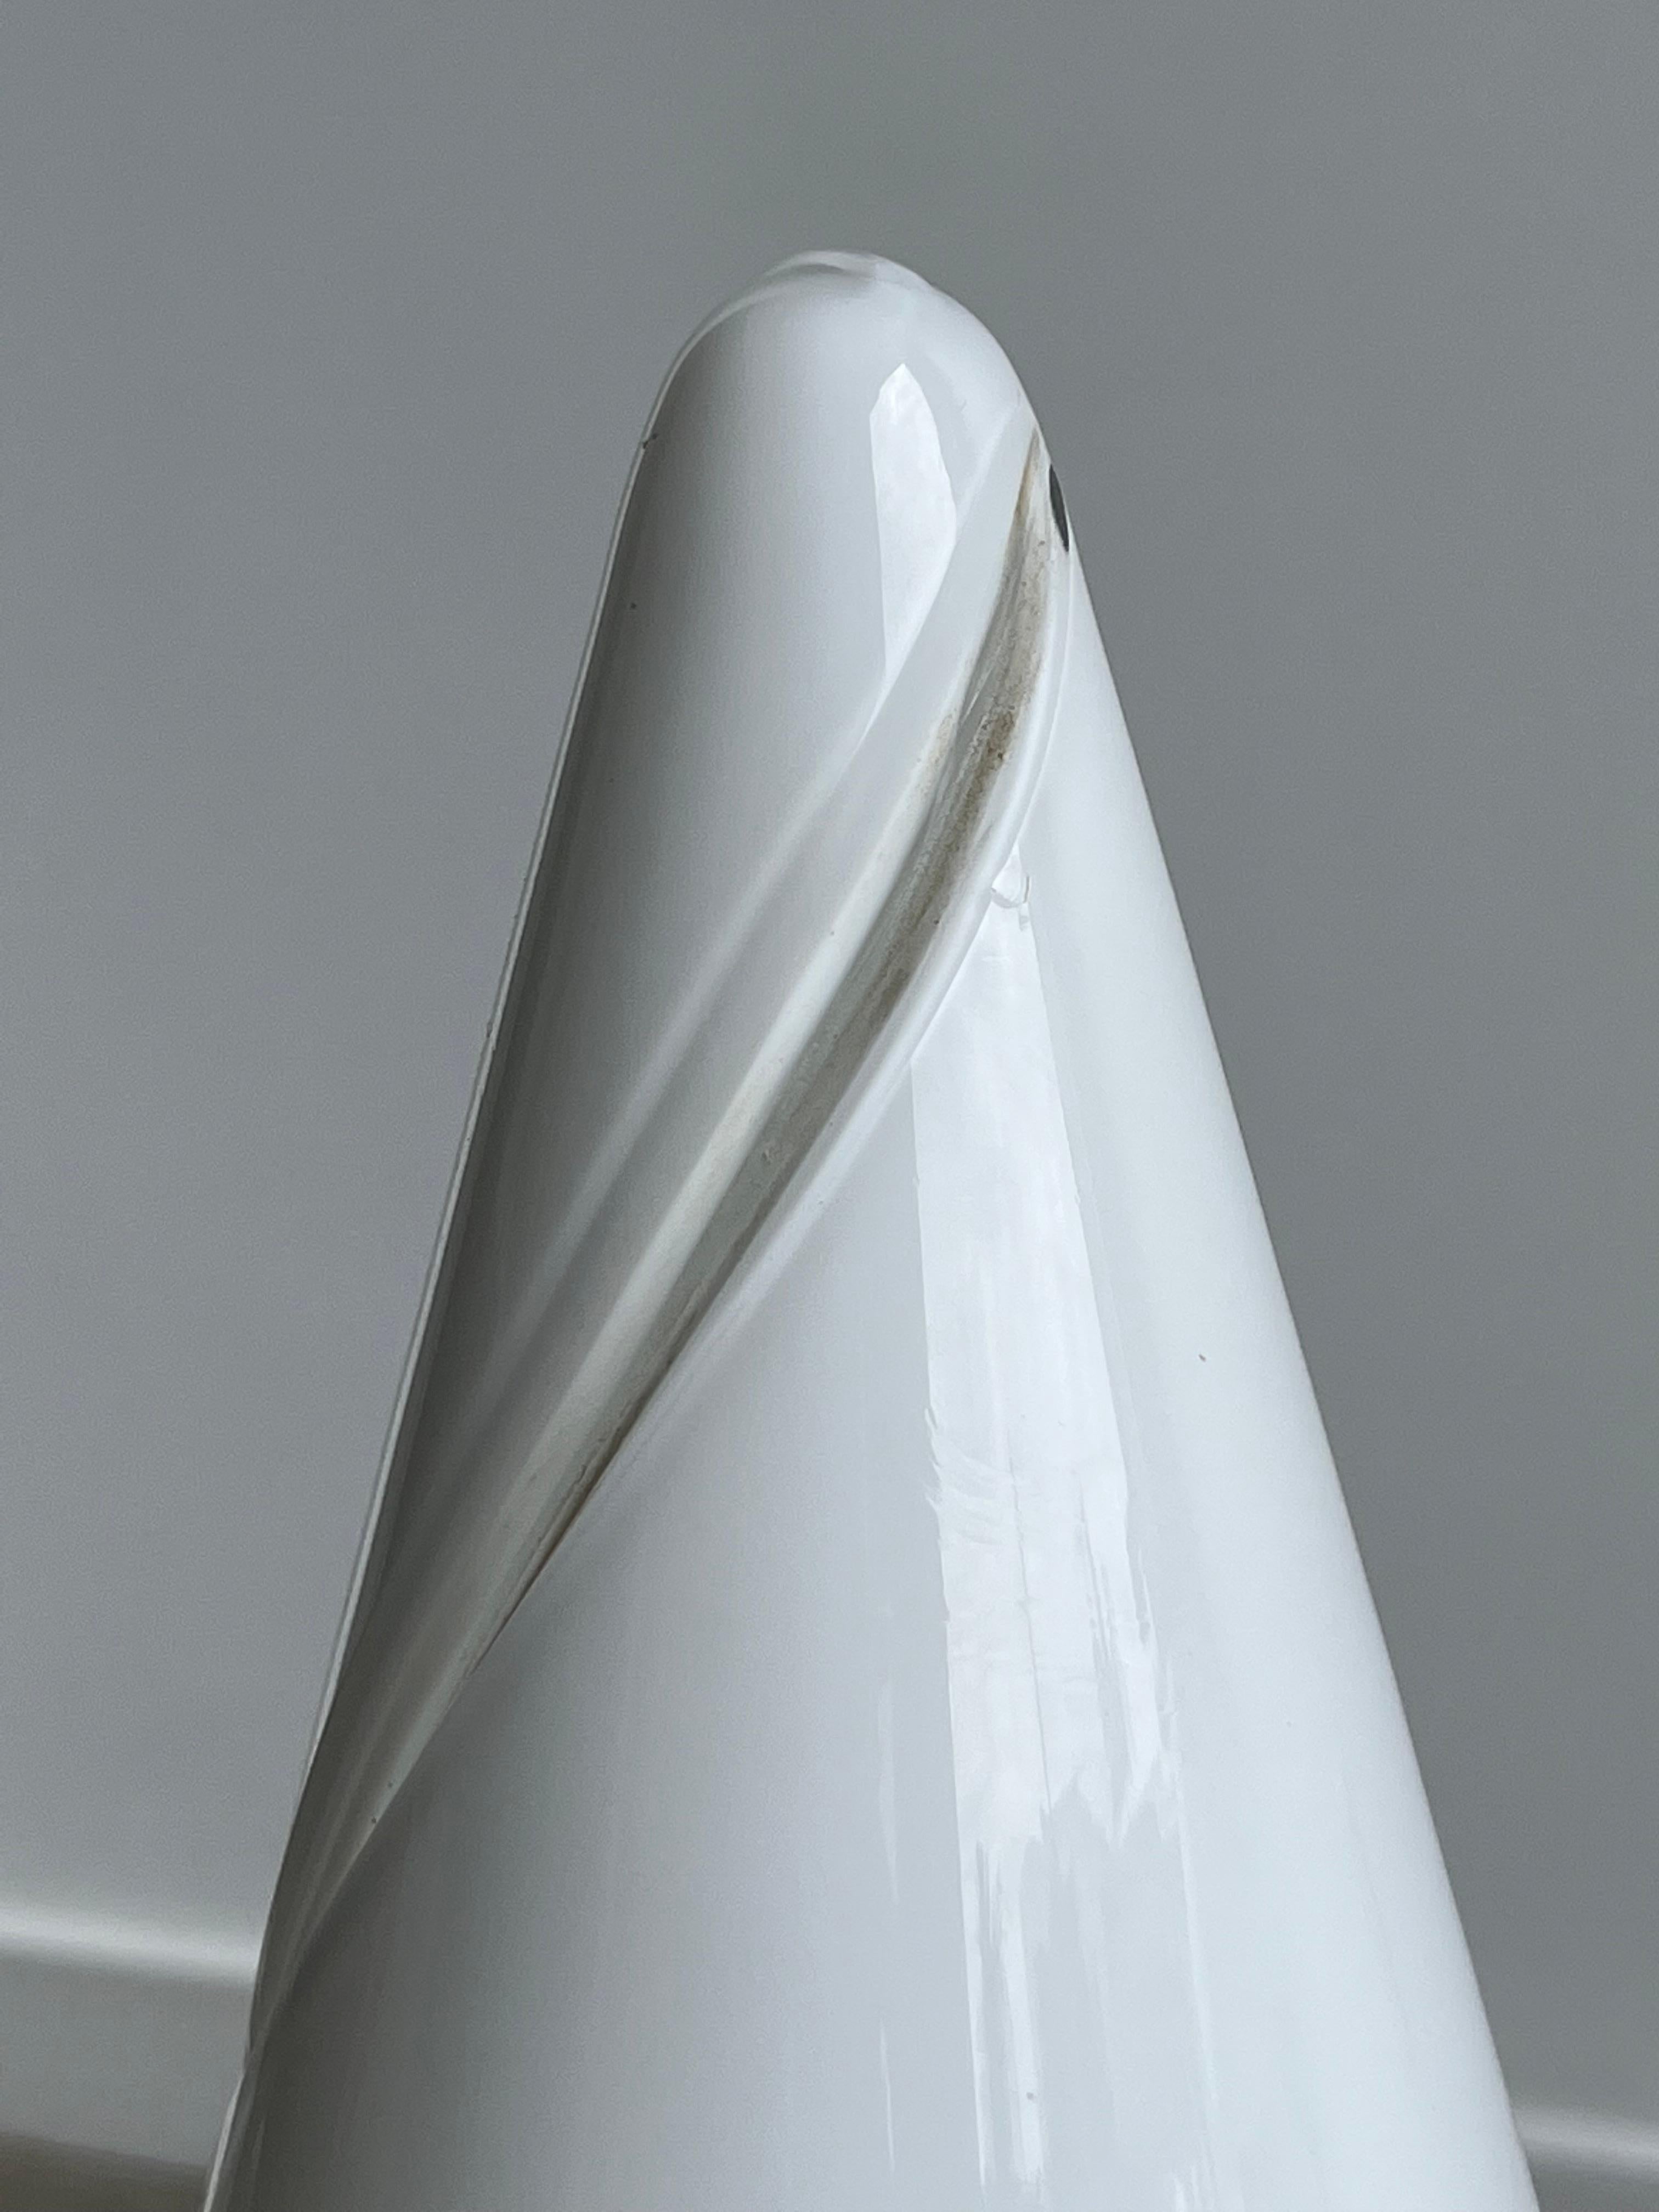 Space Age Mid-Century Modern Cone Shaped Italian Lamp in Murano Glass 1970s